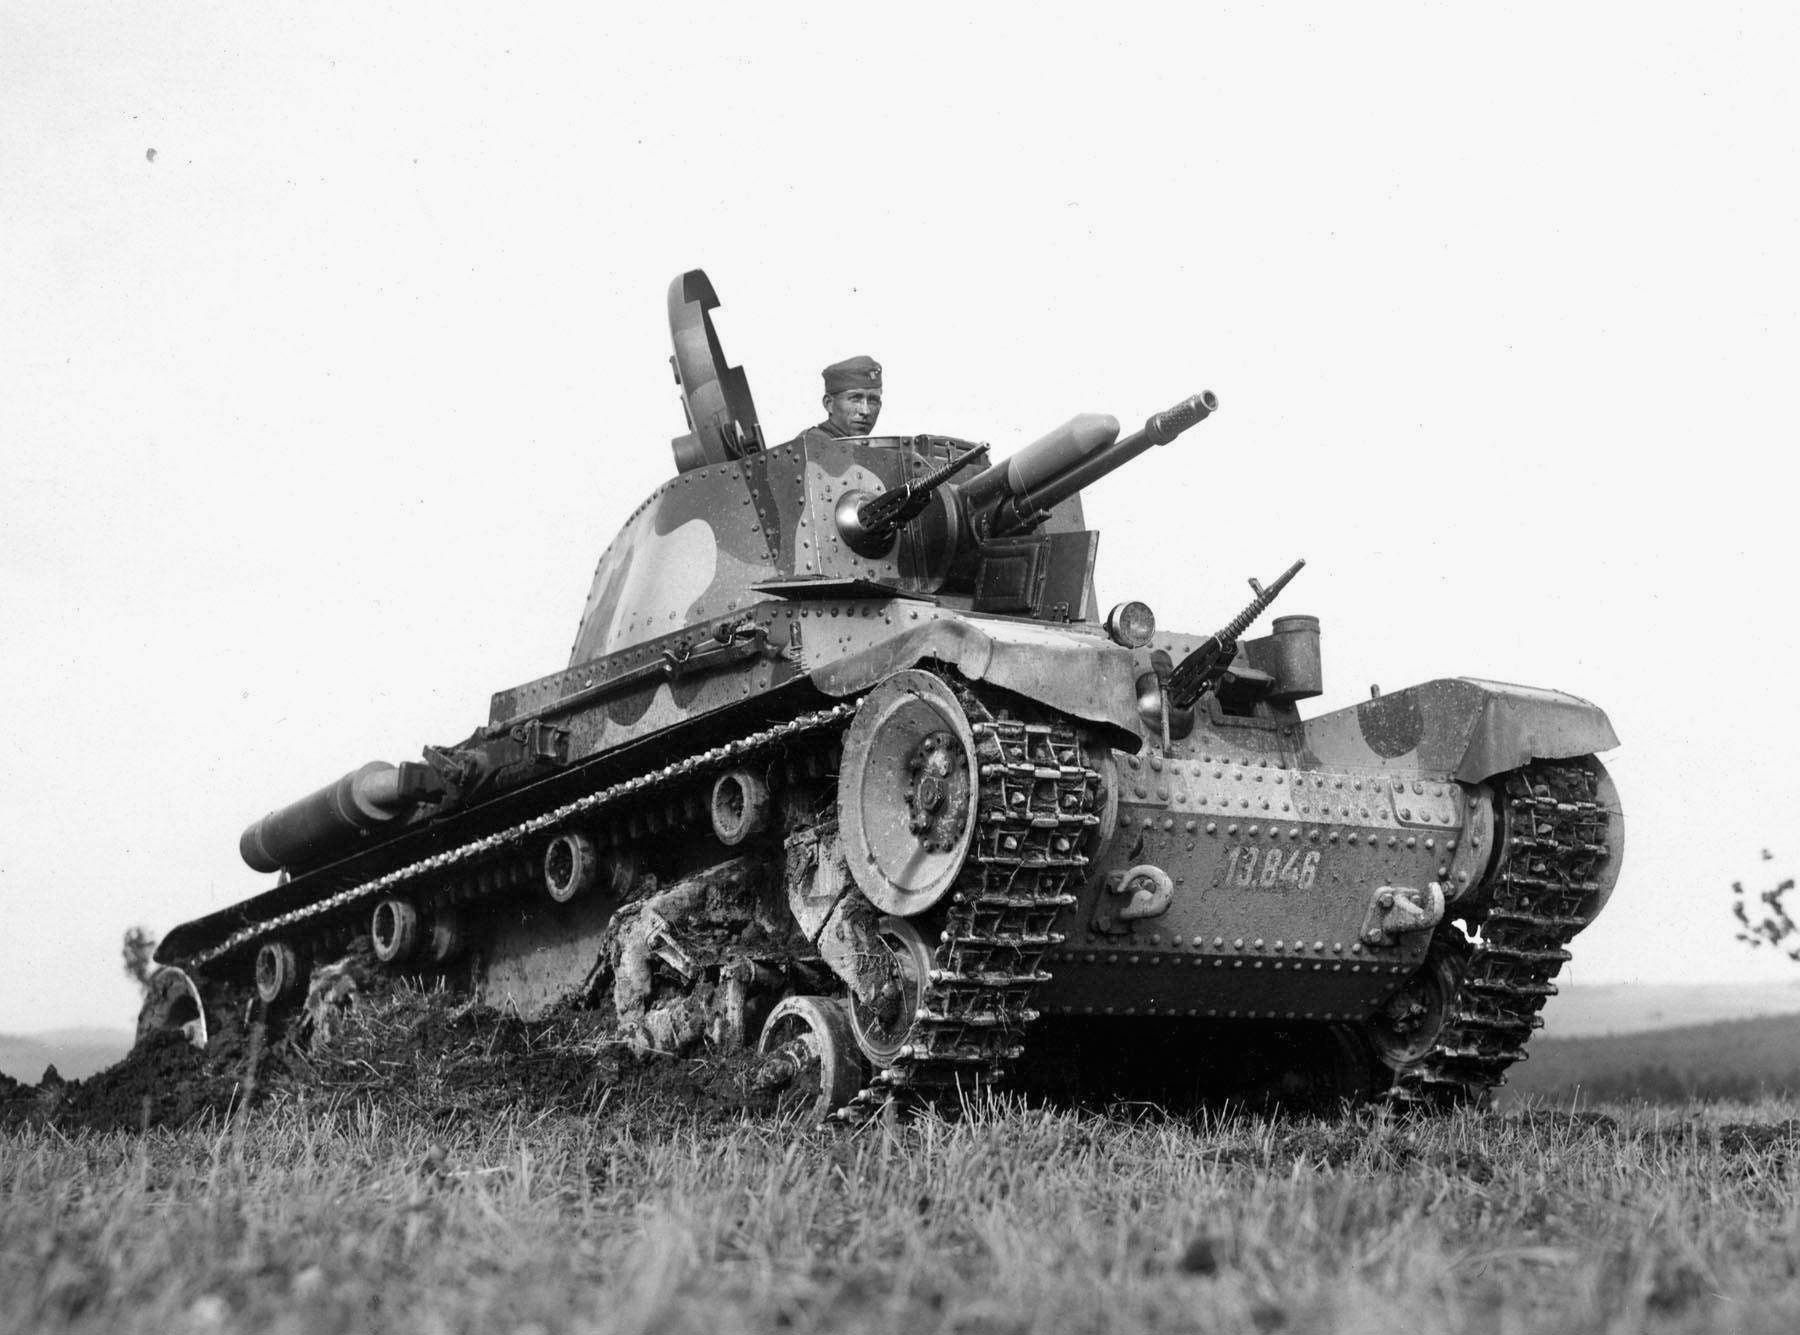 This Czech-built LT vz.35 undergoes field testing before being placed in service with the German army. With the annexation of Czechoslovakia, the Germans received a windfall of fine military equipment, as well as the Skoda Works, excellent arms production facilities. 